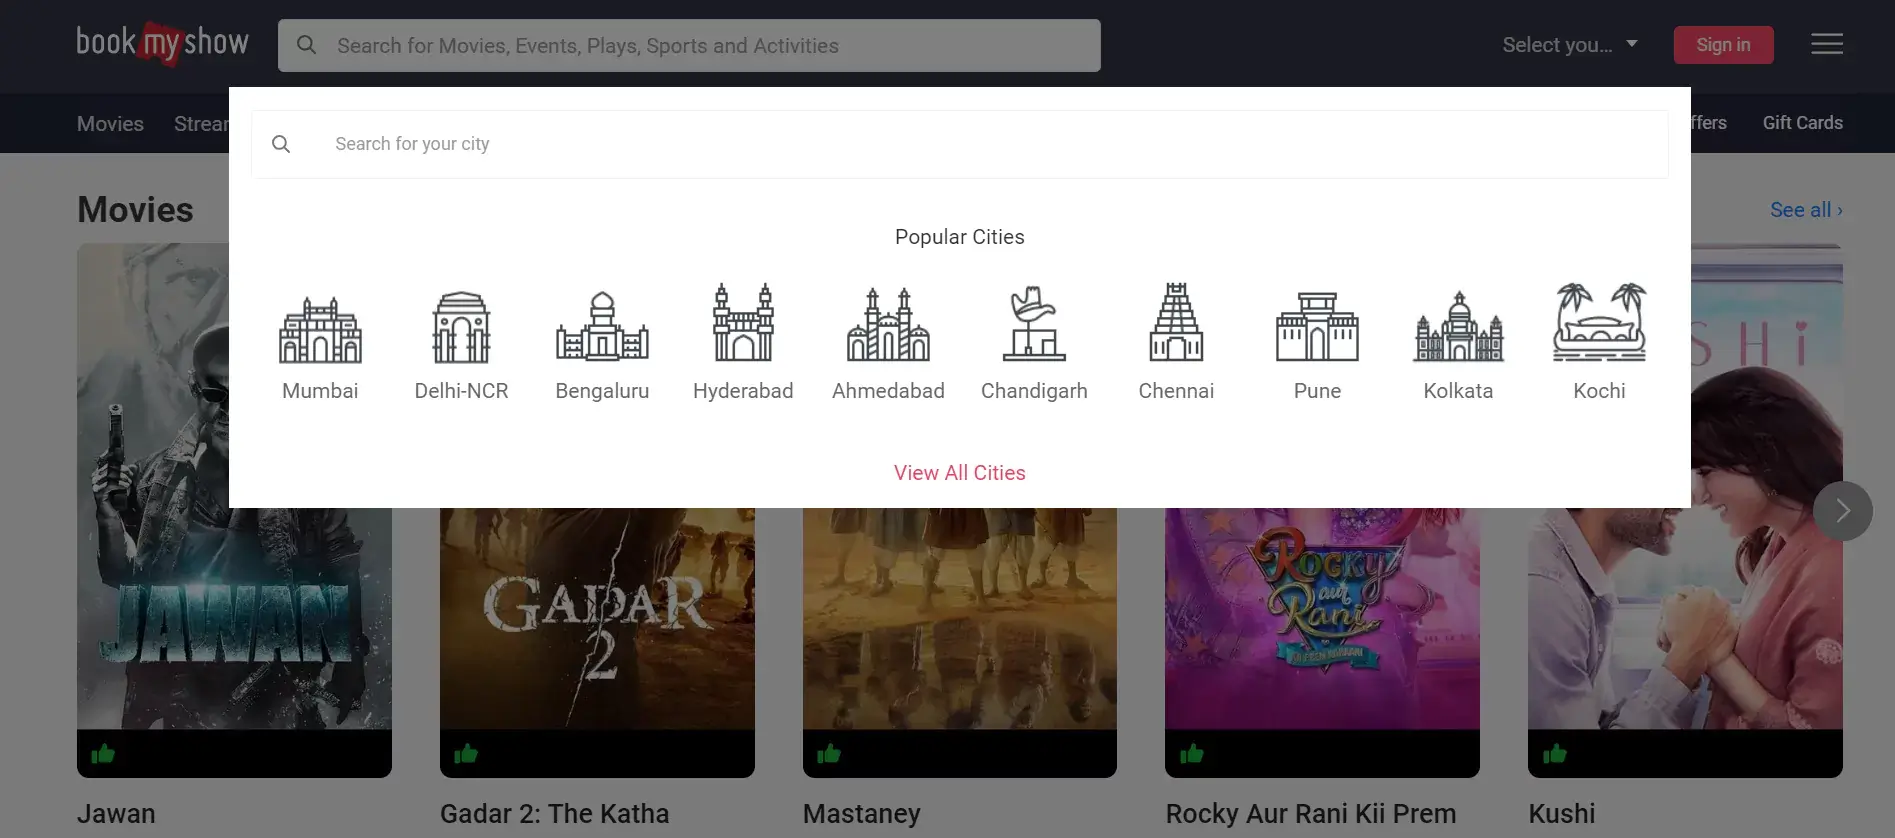 BookMyShow India is the most popular online ticket vendor in the country